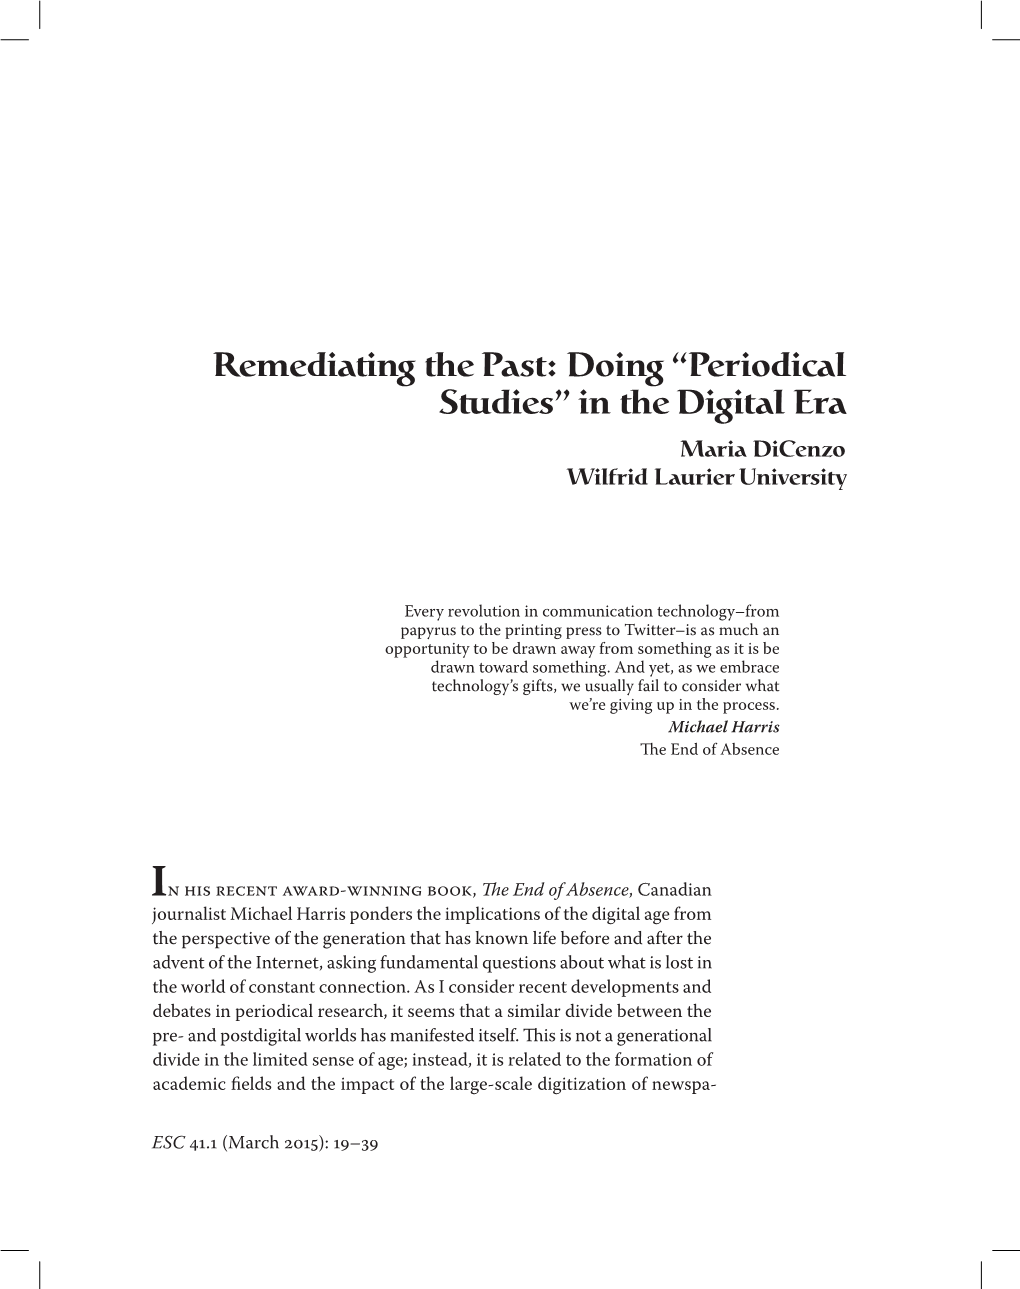 Remediating the Past: Doing “Periodical Studies” in the Digital Era Maria Dicenzo Wilfrid Laurier University